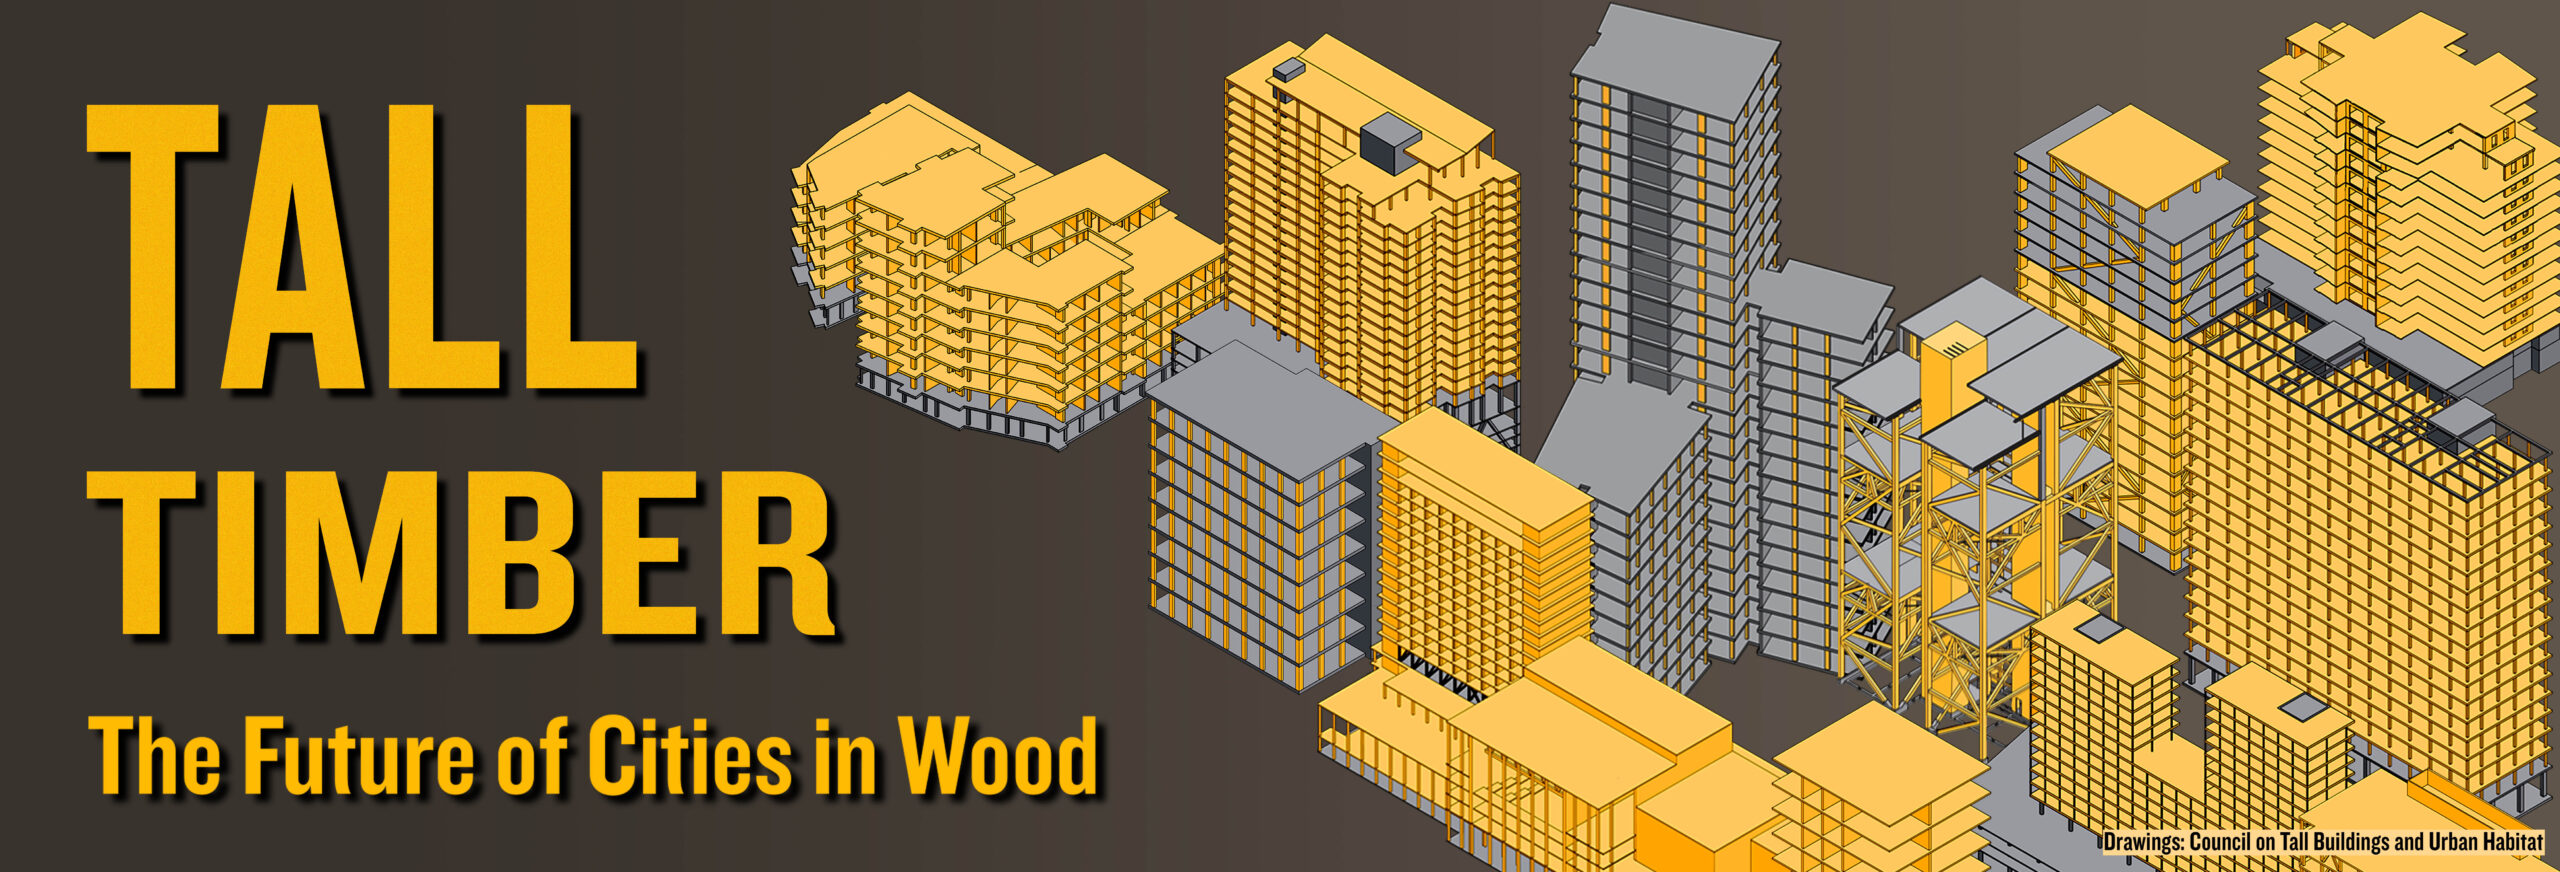 Tall Timber: The Future of Cities in Wood